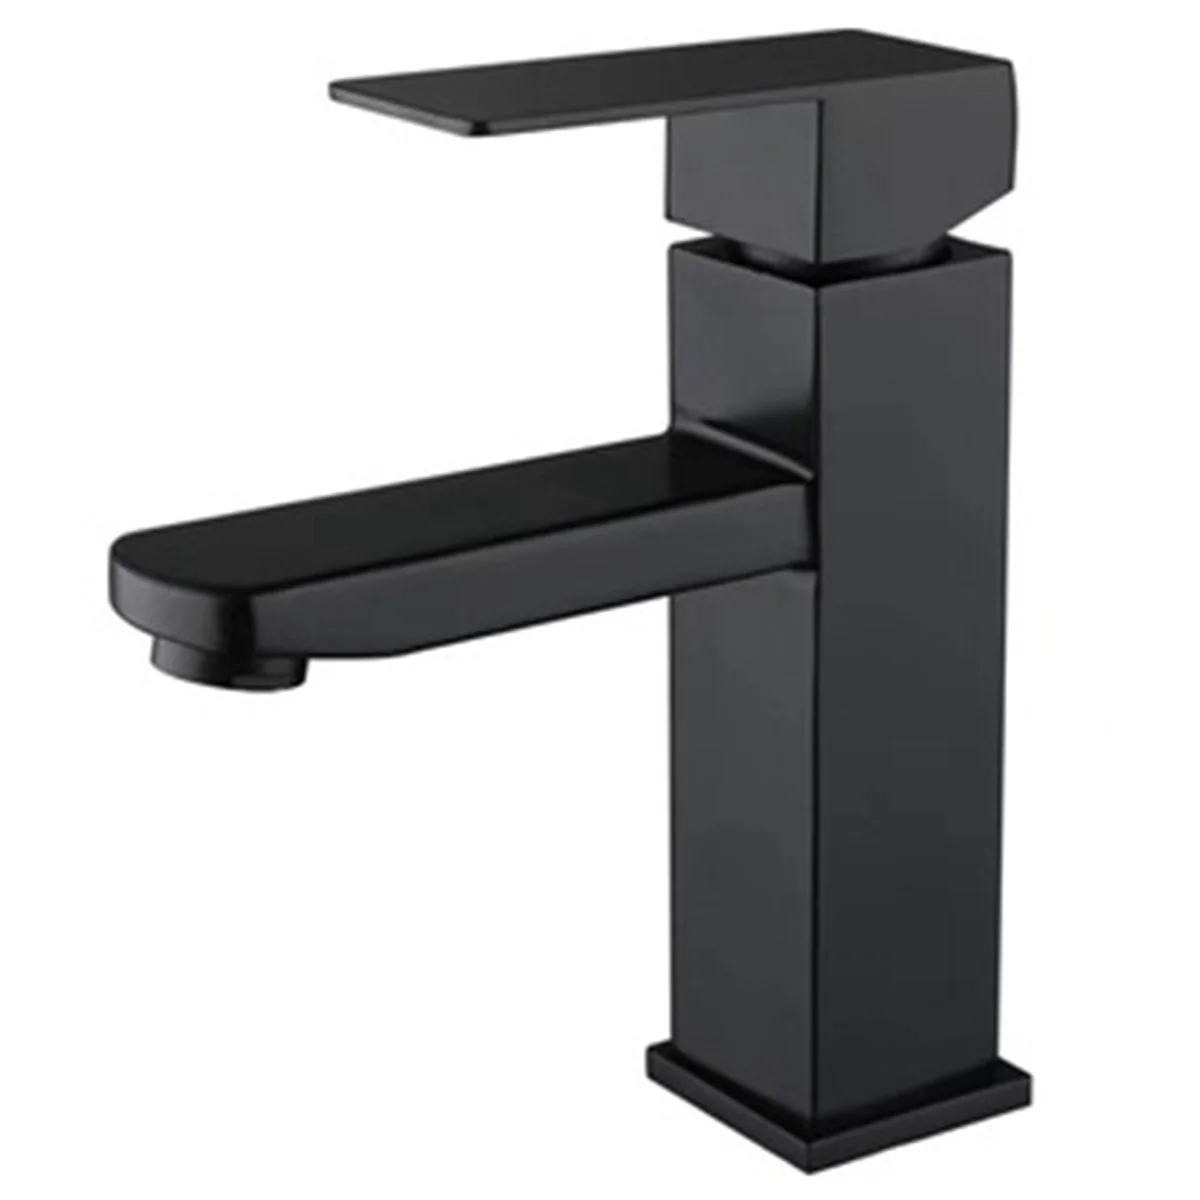 

Bathroom Sink Faucet, Hot and Cold Water Basin Faucet, Matte Black